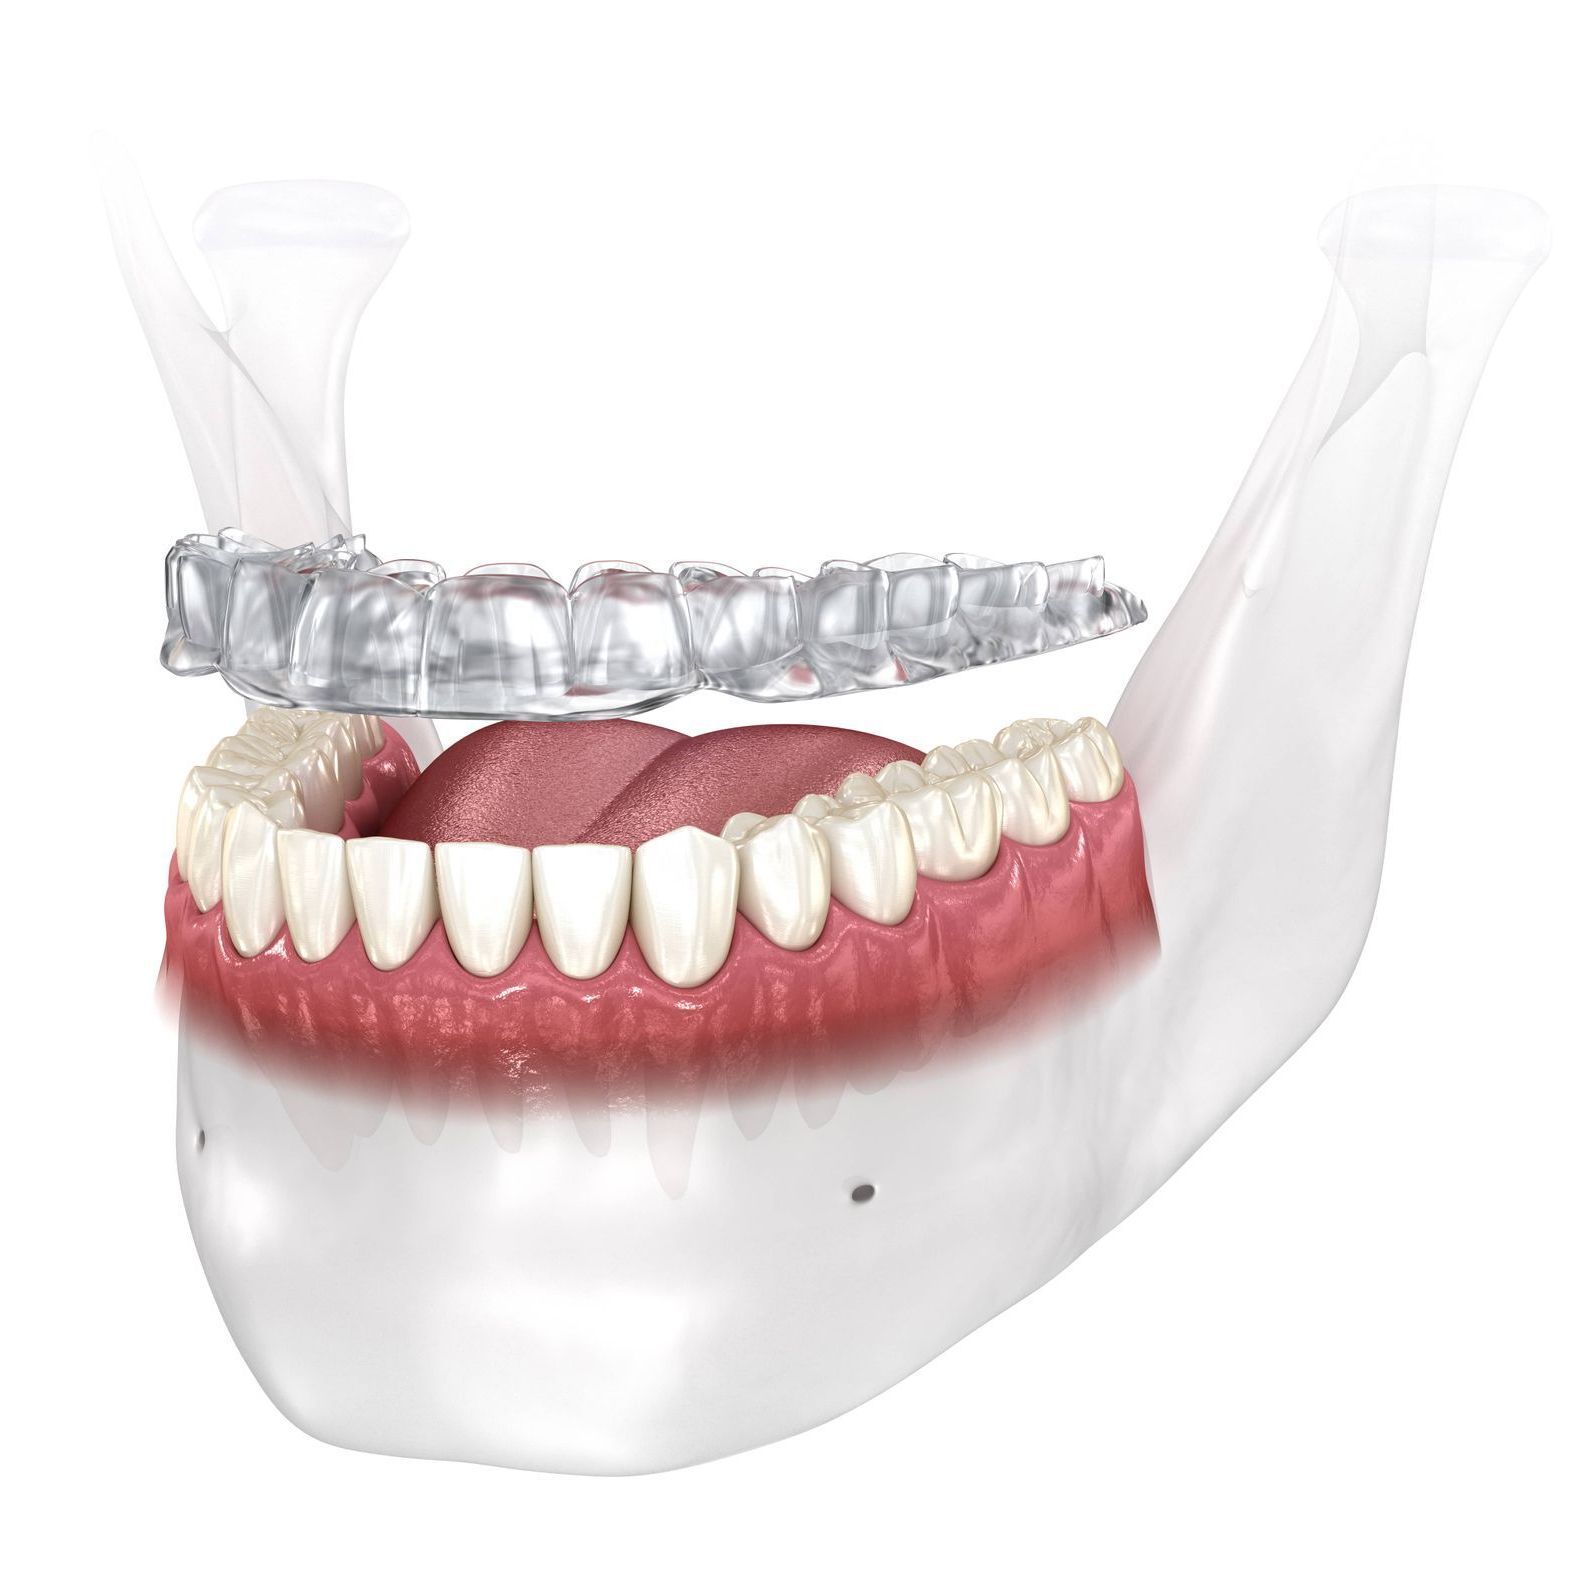 A computer generated image of an oral appliance in the mouth